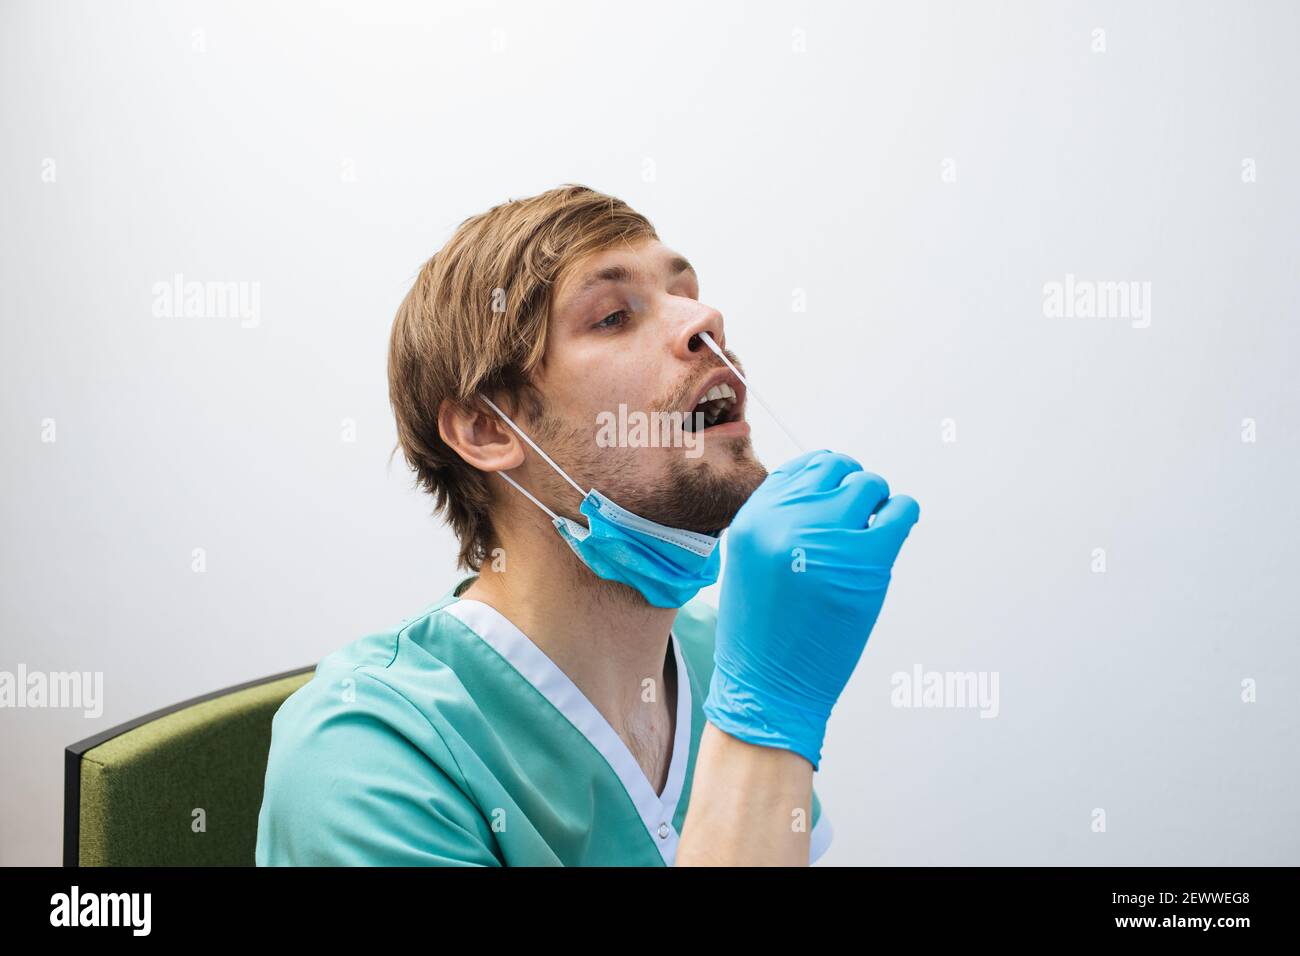 Man self test for COVID-19 home test kit. Male doctor Coronavirus nasal swab test for infection. Impact of COVID-19 on health care system and public Stock Photo